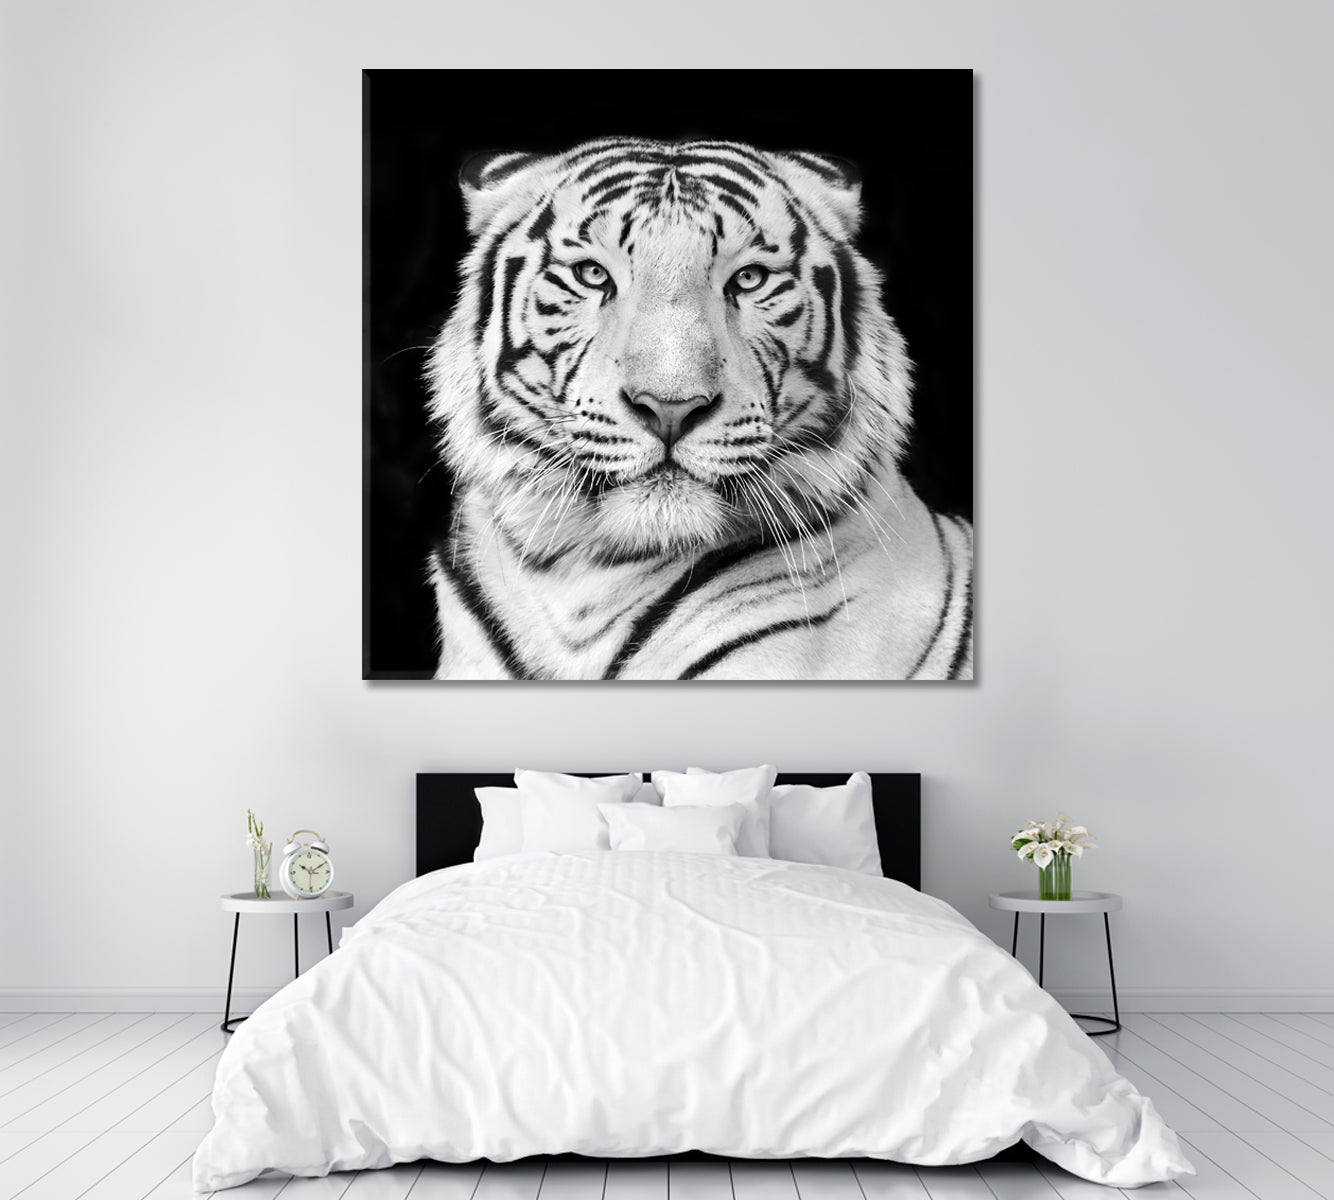 White Bengal Tiger Canvas Print ArtLexy 1 Panel 12"x12" inches 